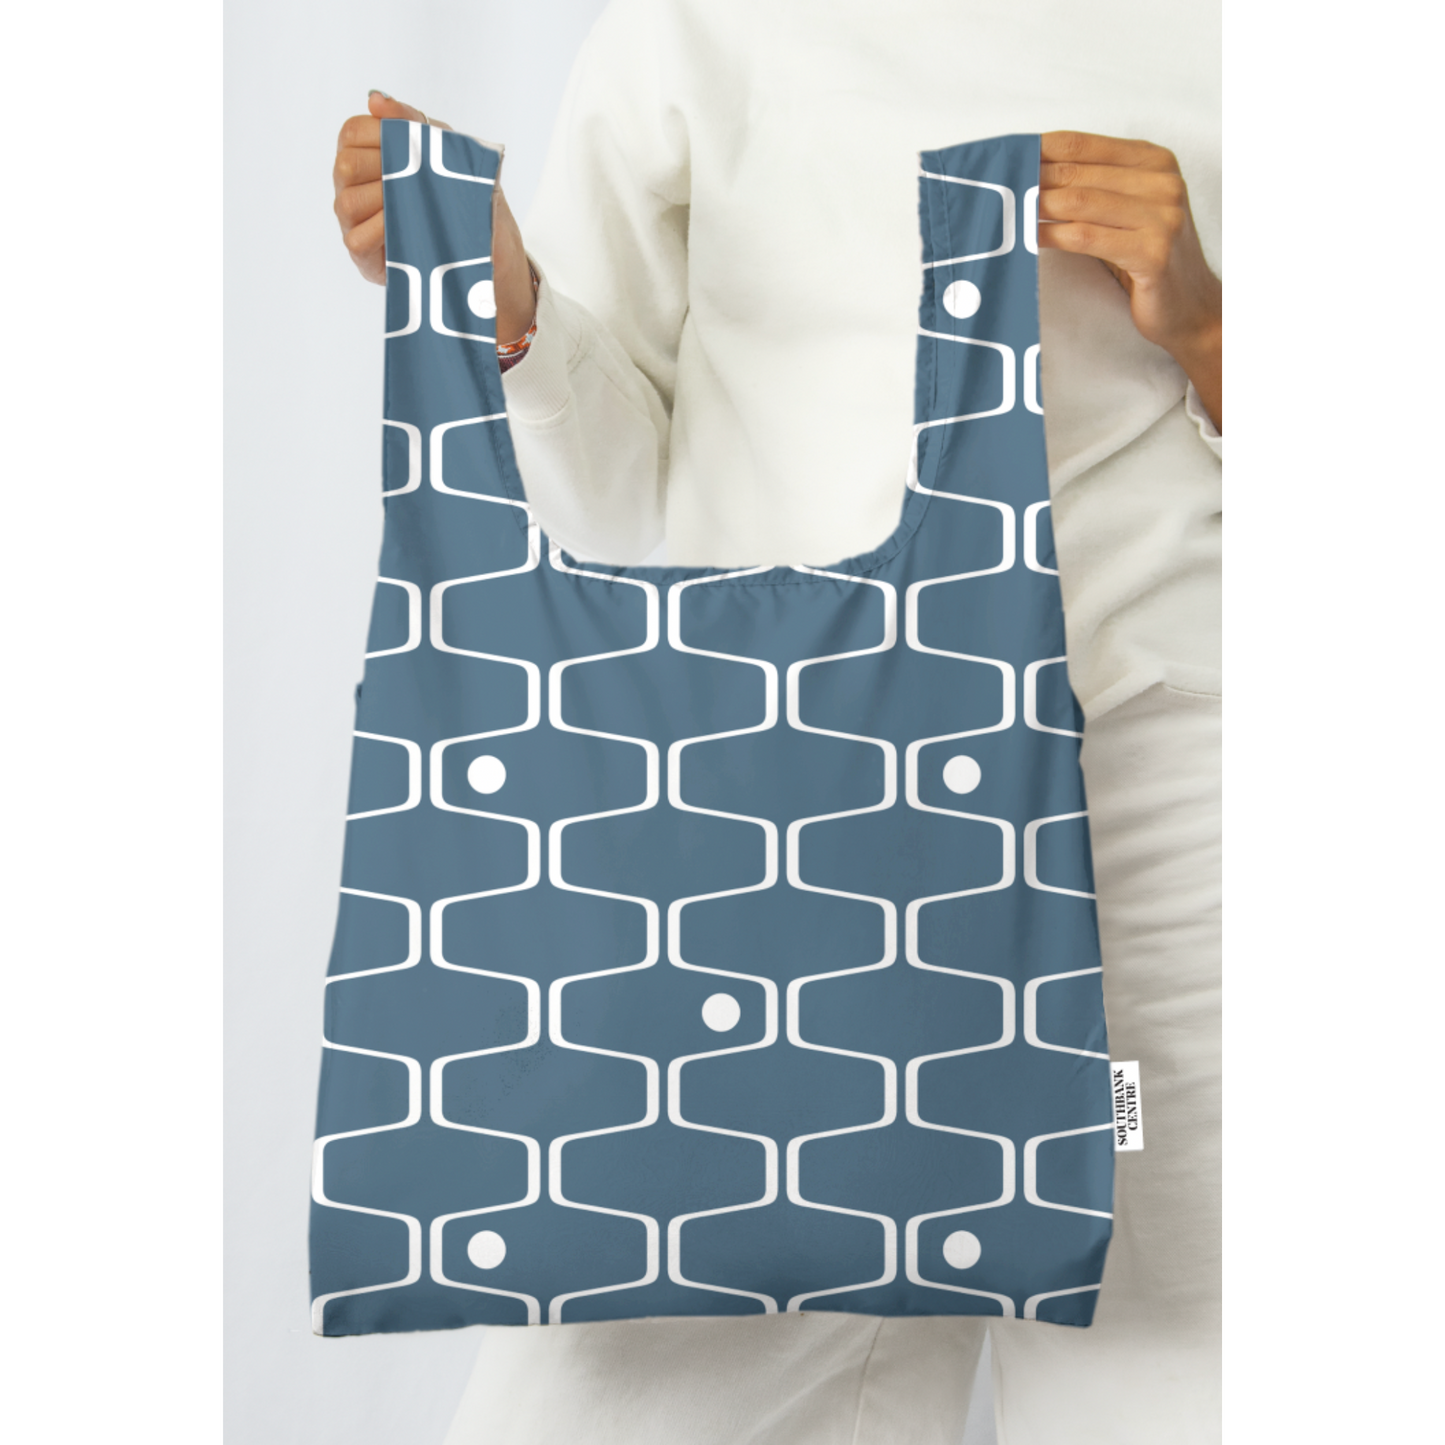 A person holding a kind bag with net & ball pattern in blue